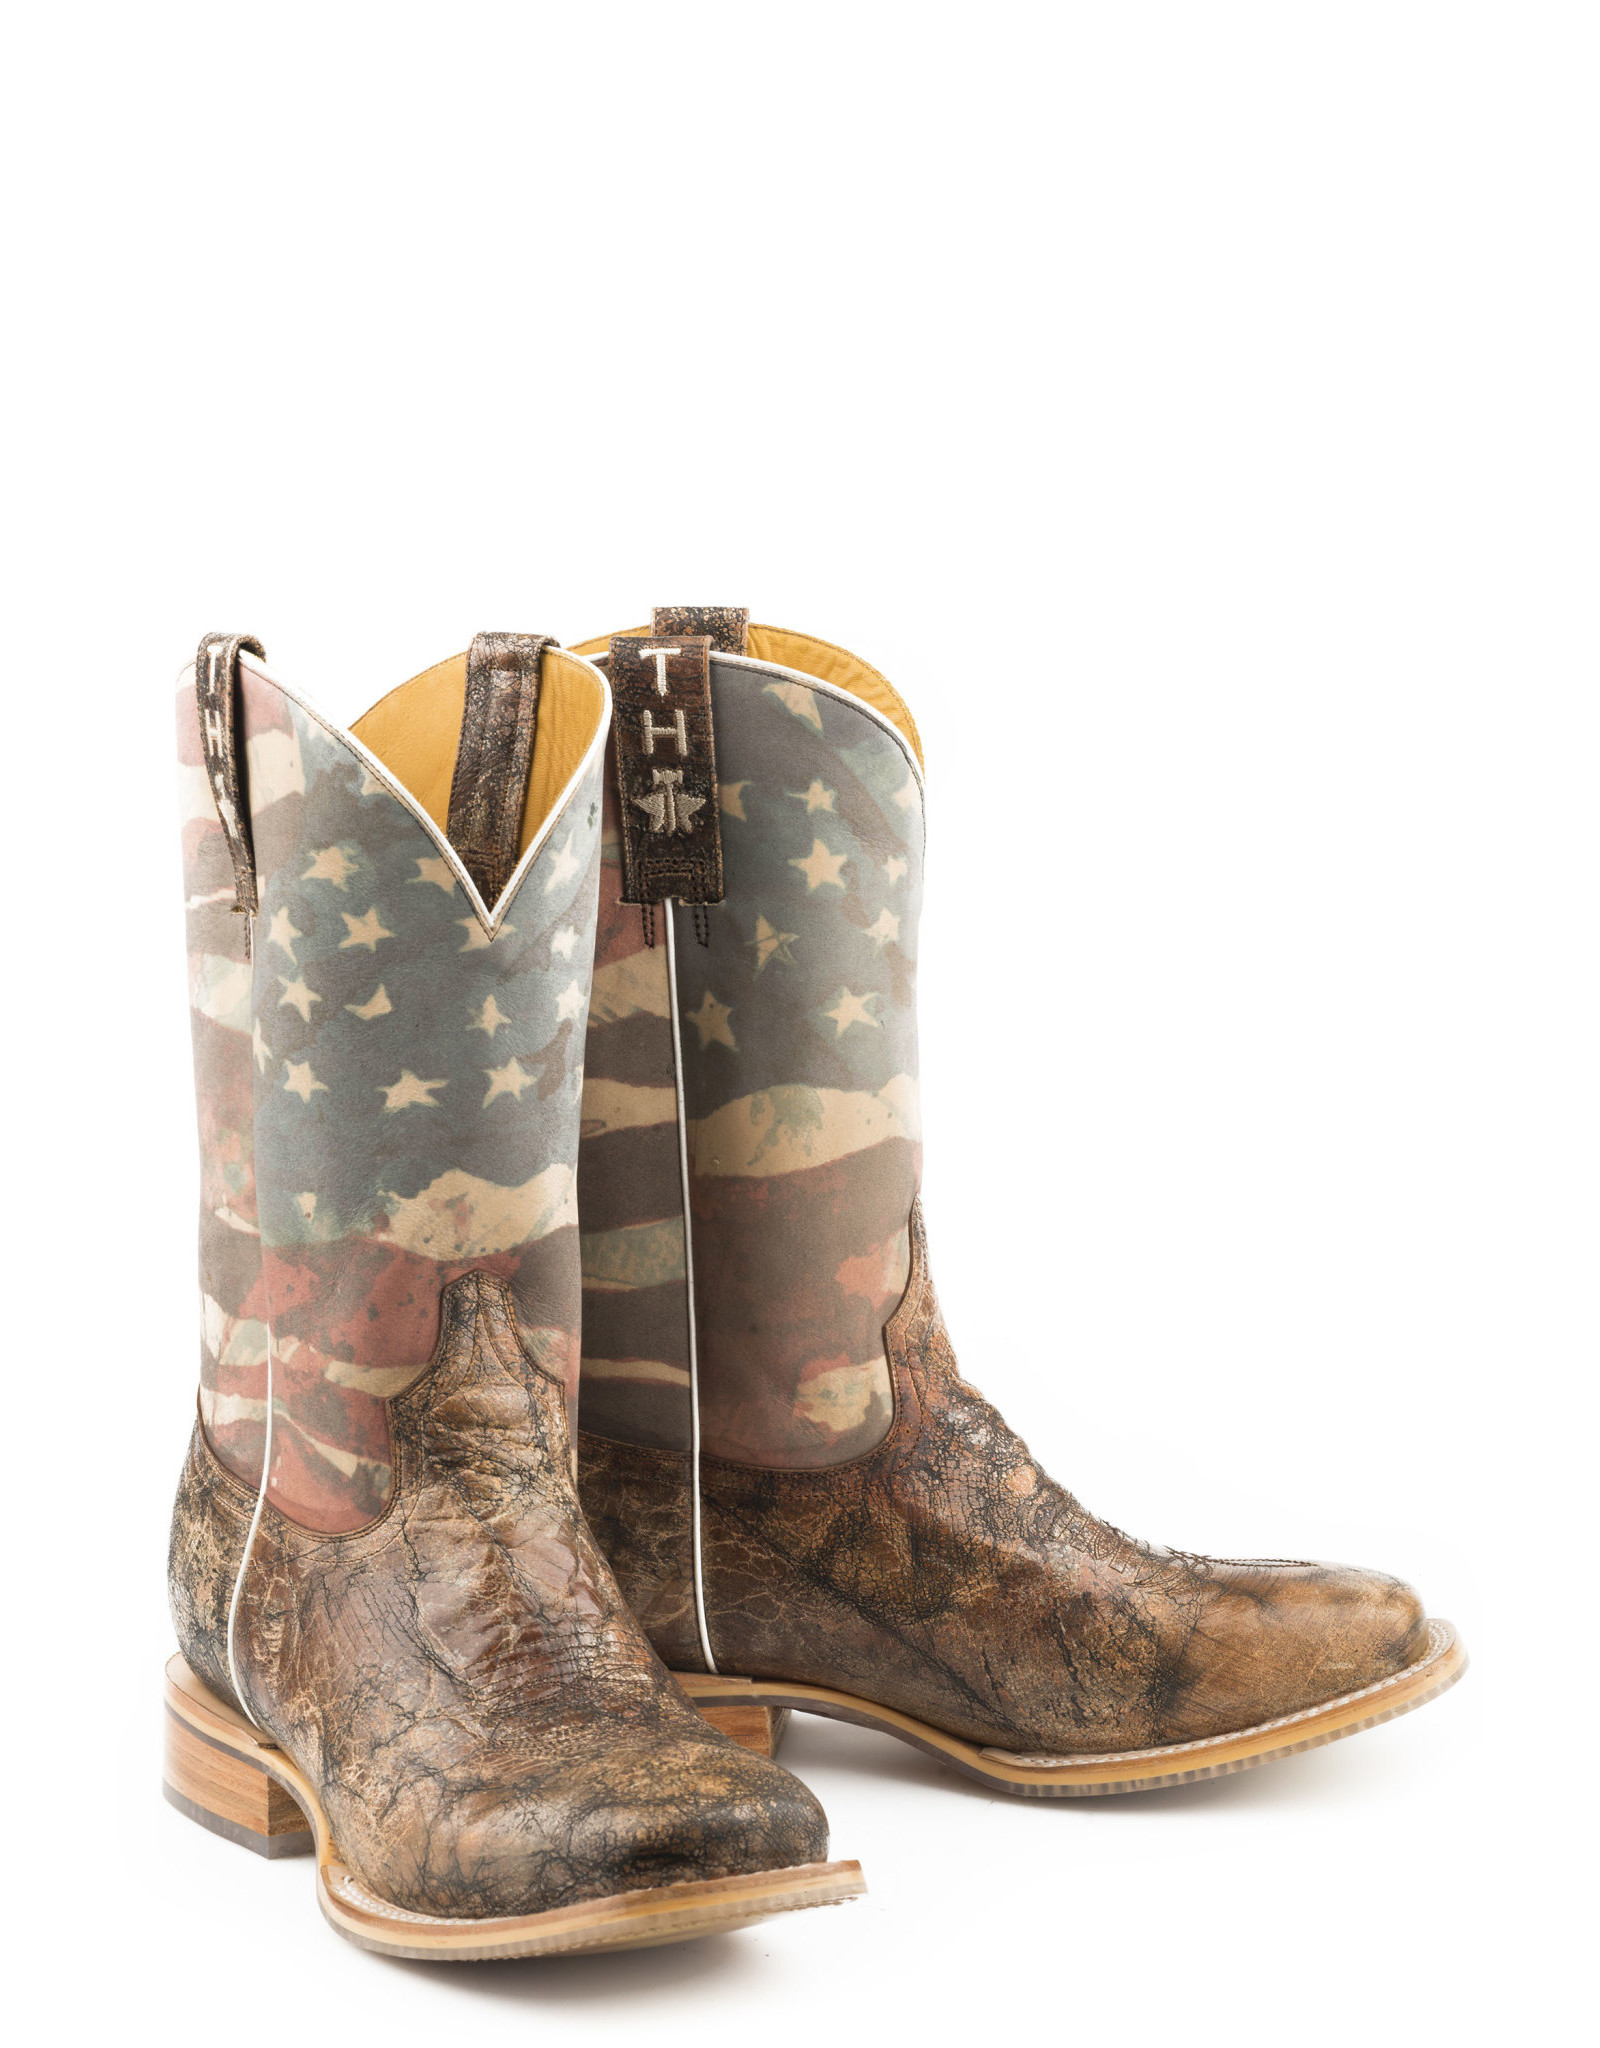 Tin Haul Men's Land of the Free Western Boots 14-020-0077-0386-BR